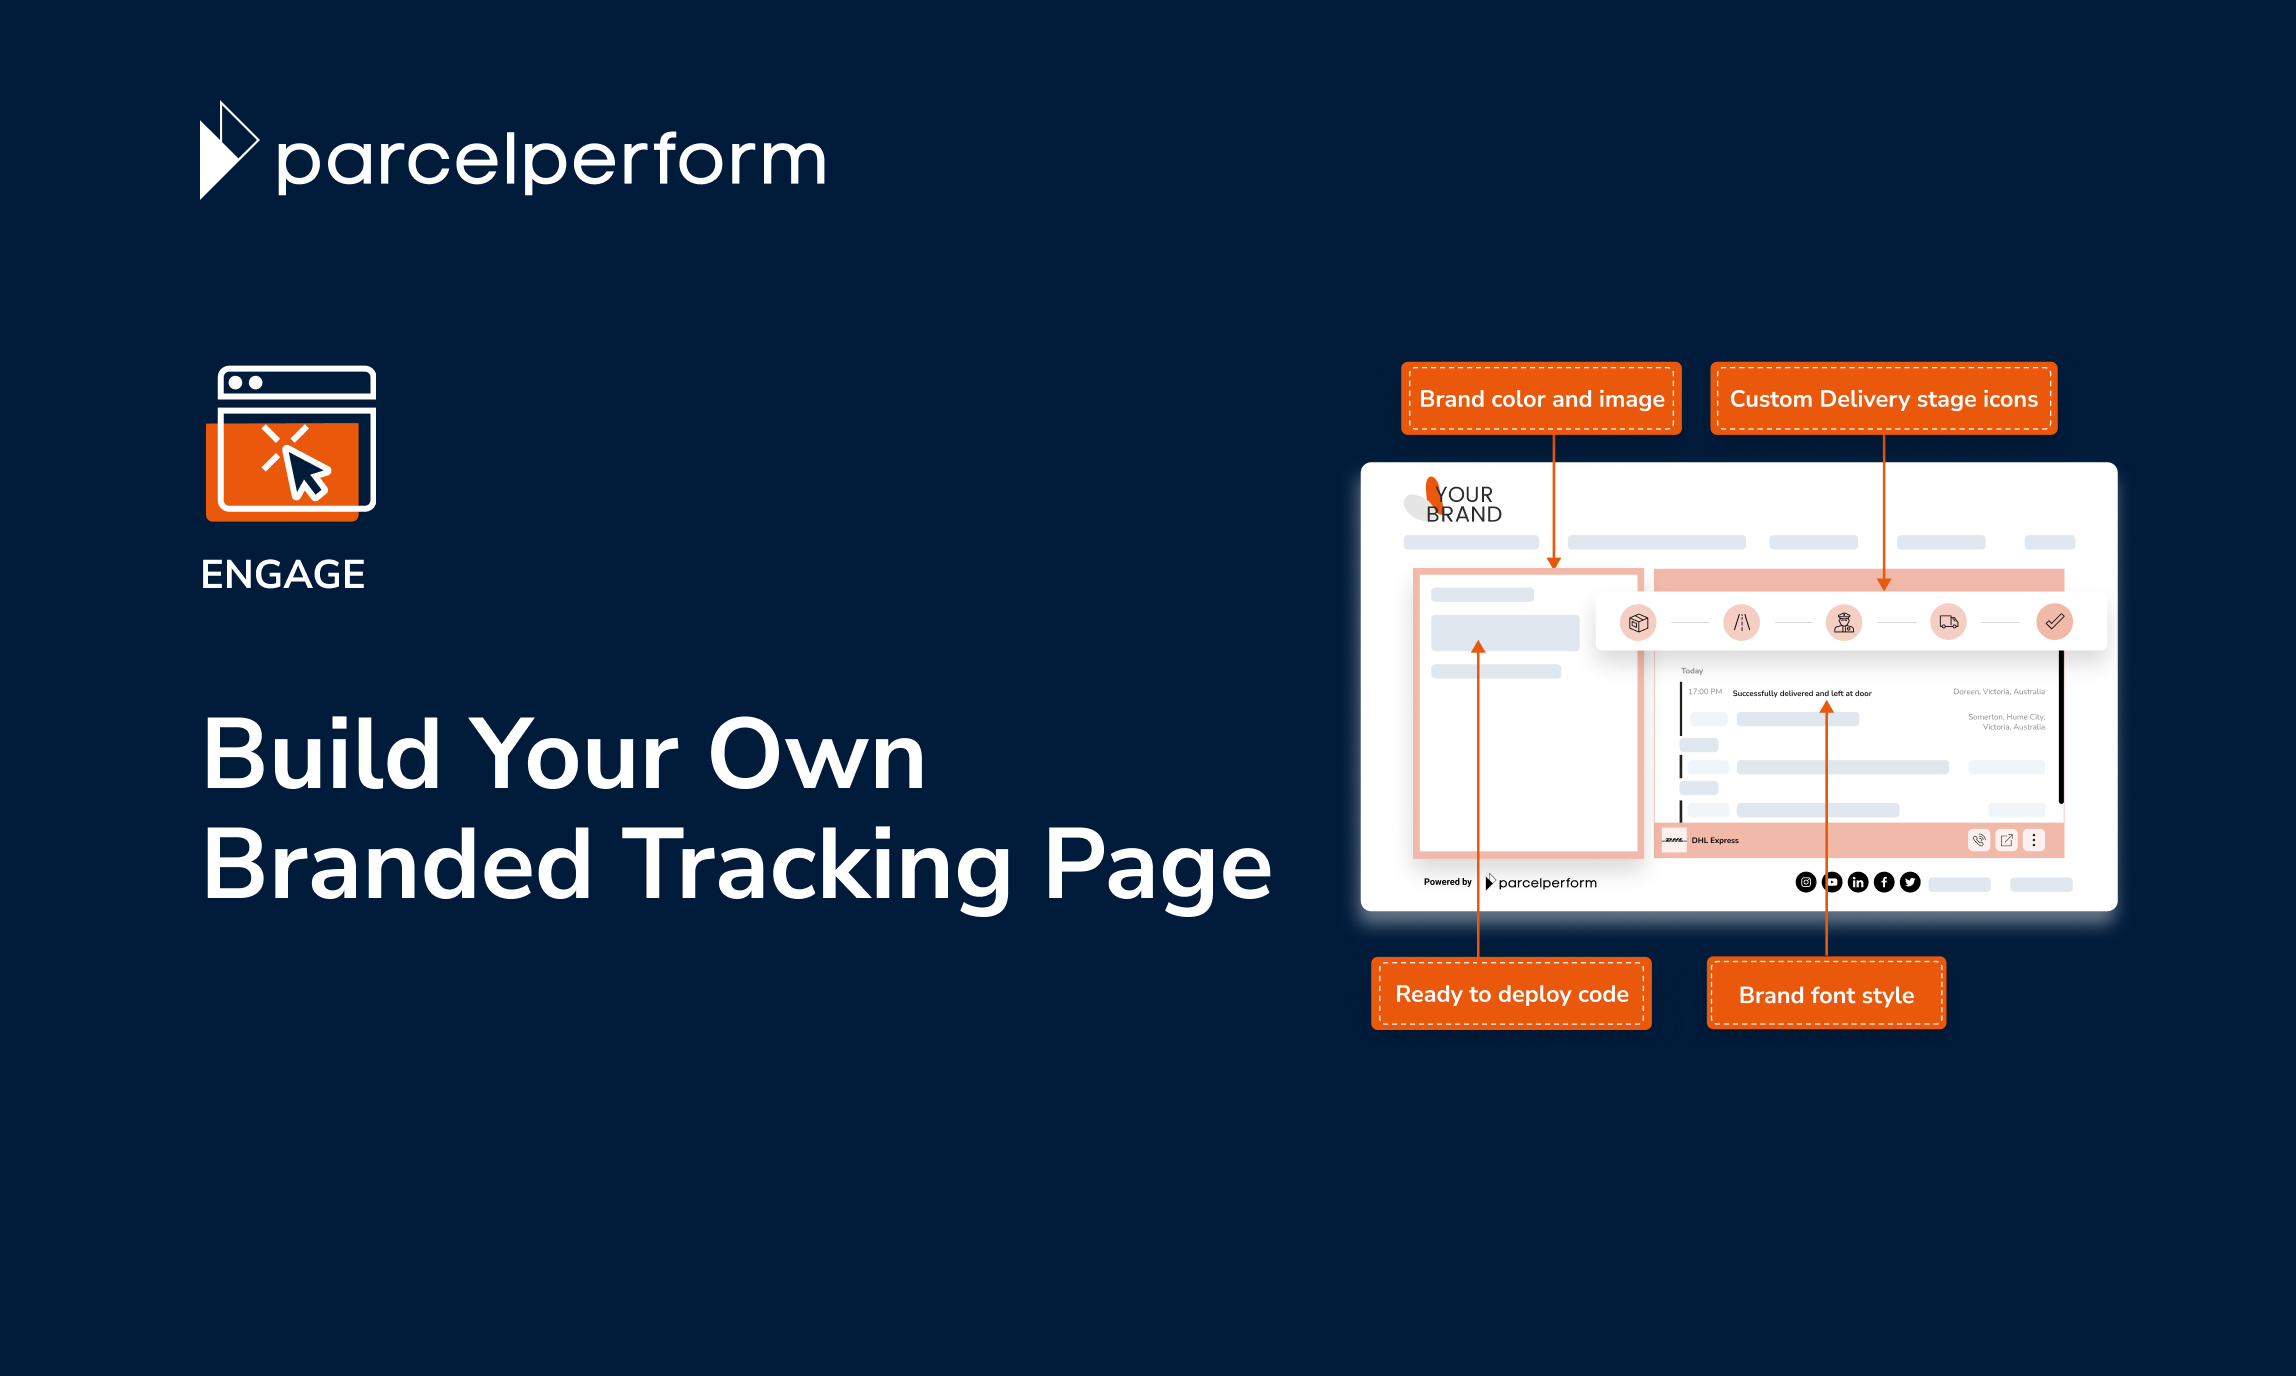 How to: Build Your Own Branded Tracking Page